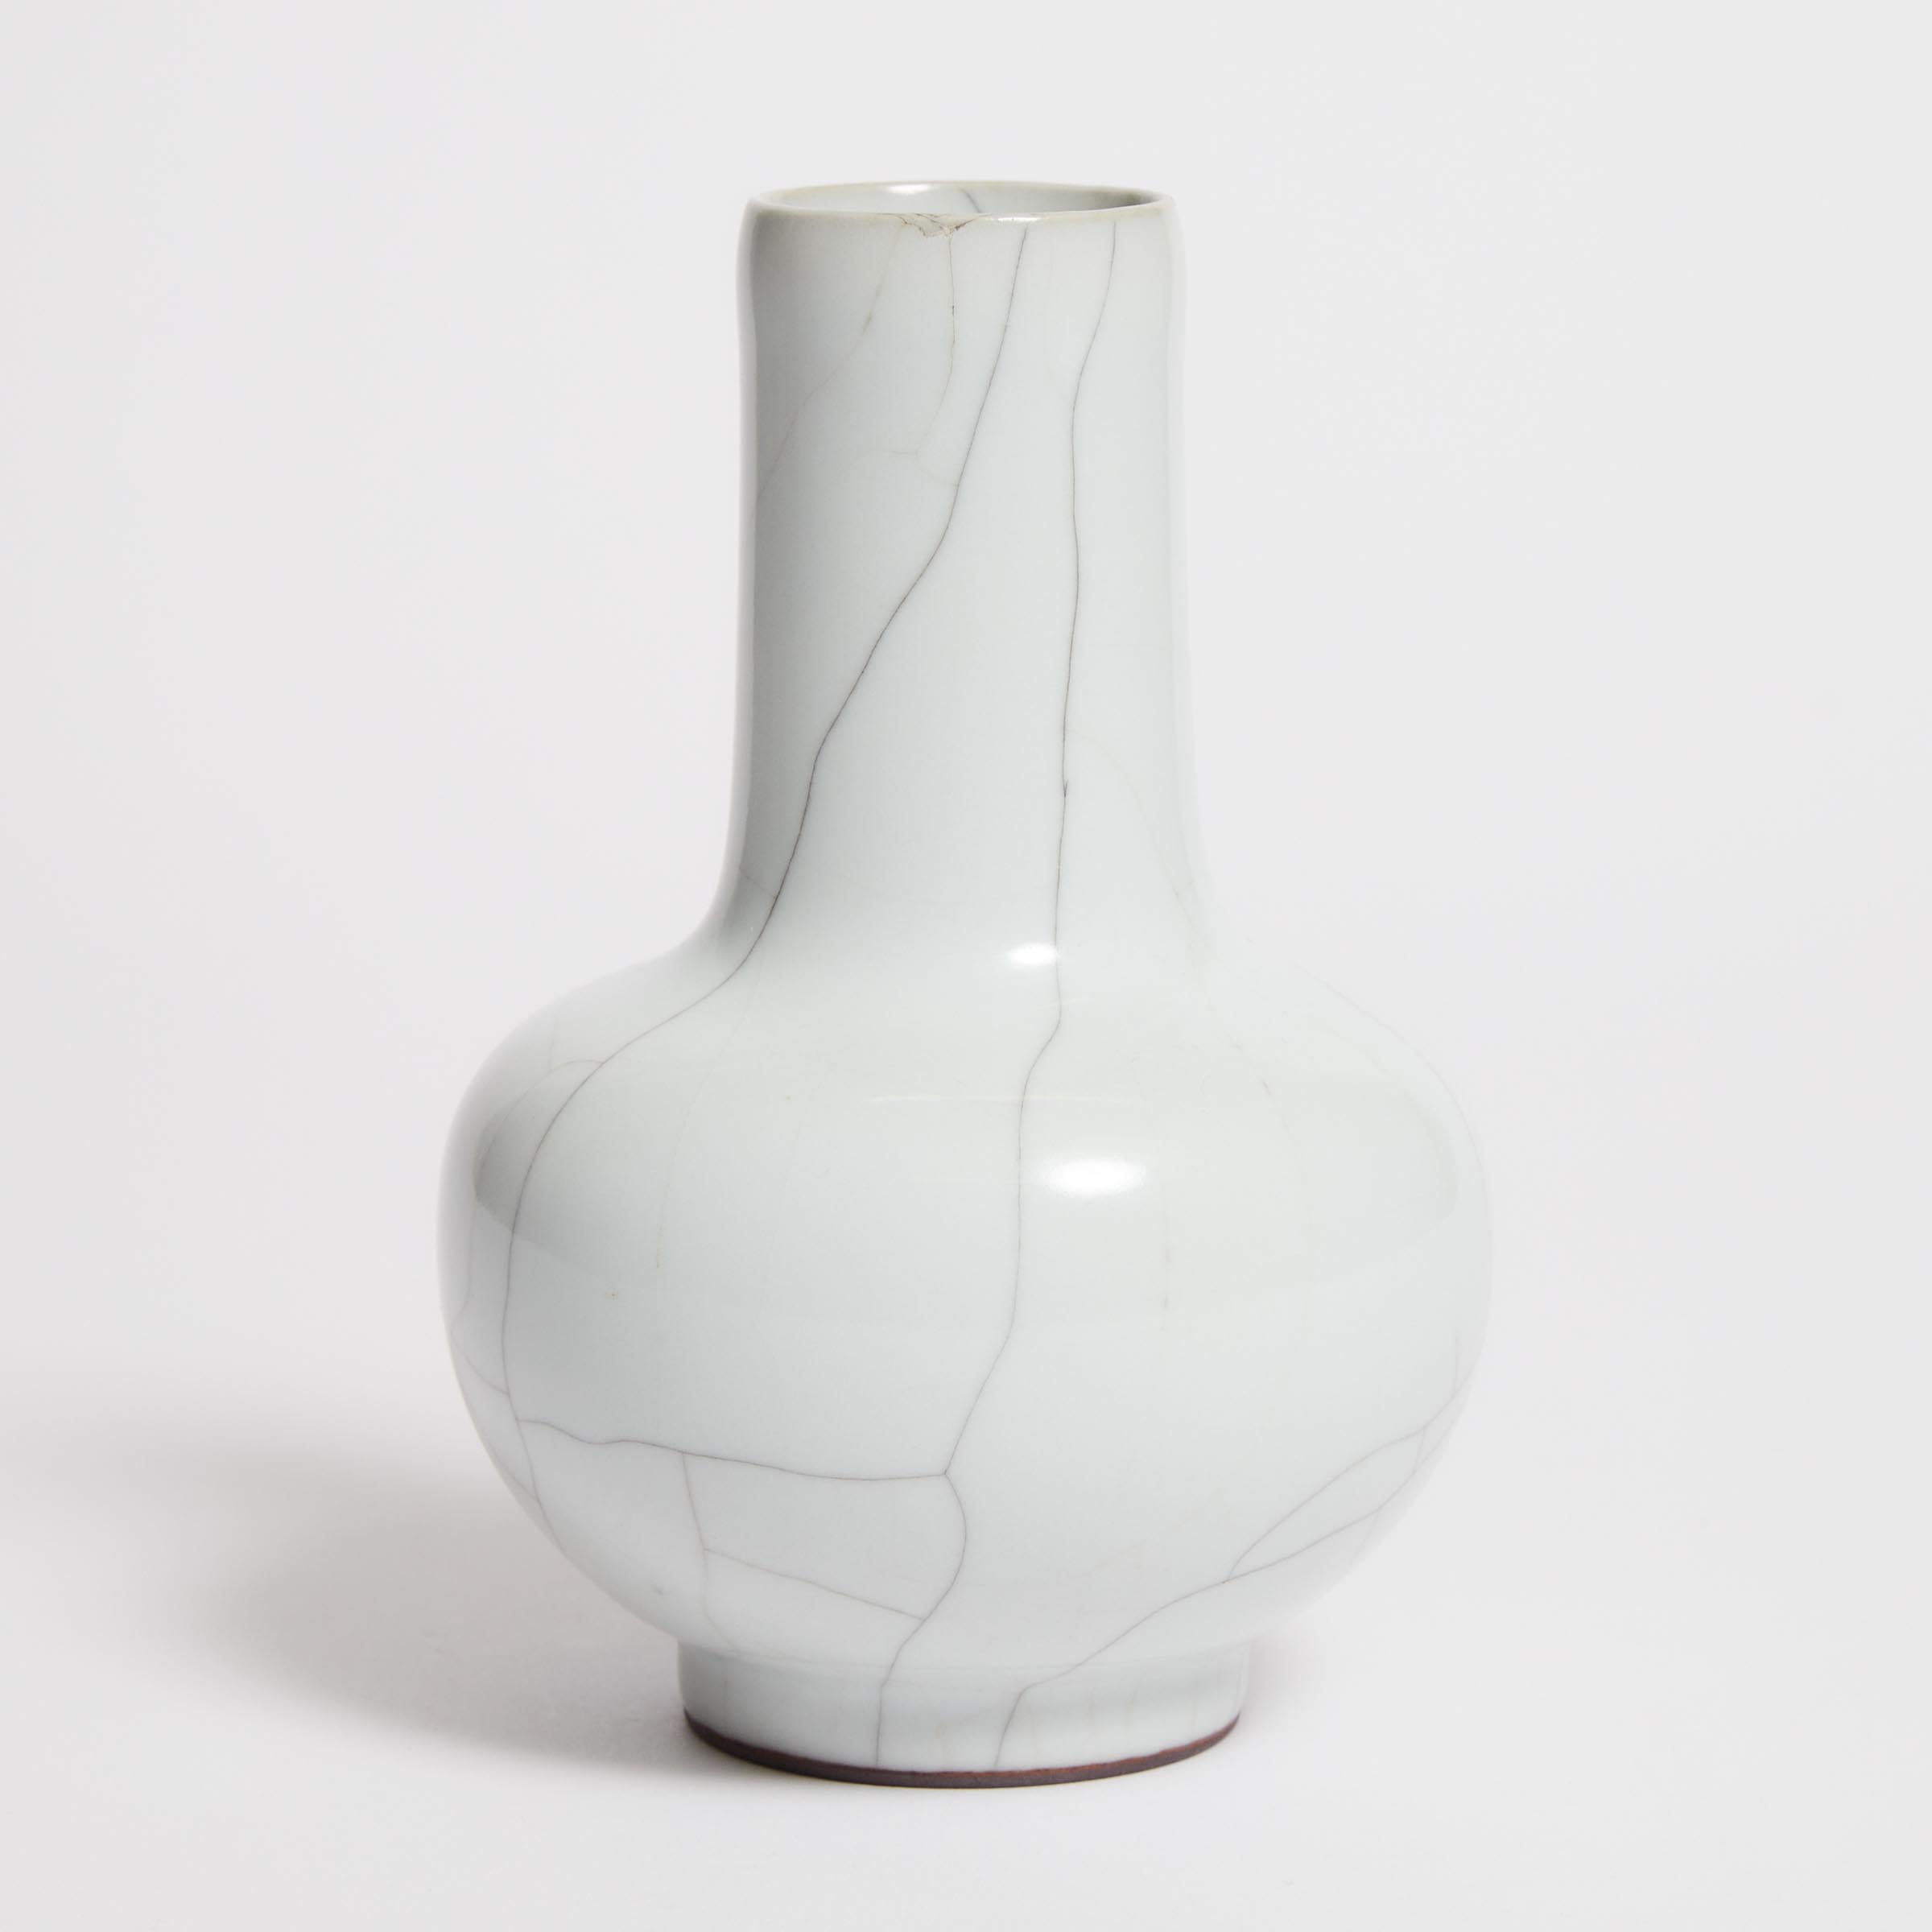 A Small Guan-Type Bottle Vase, 18th Century